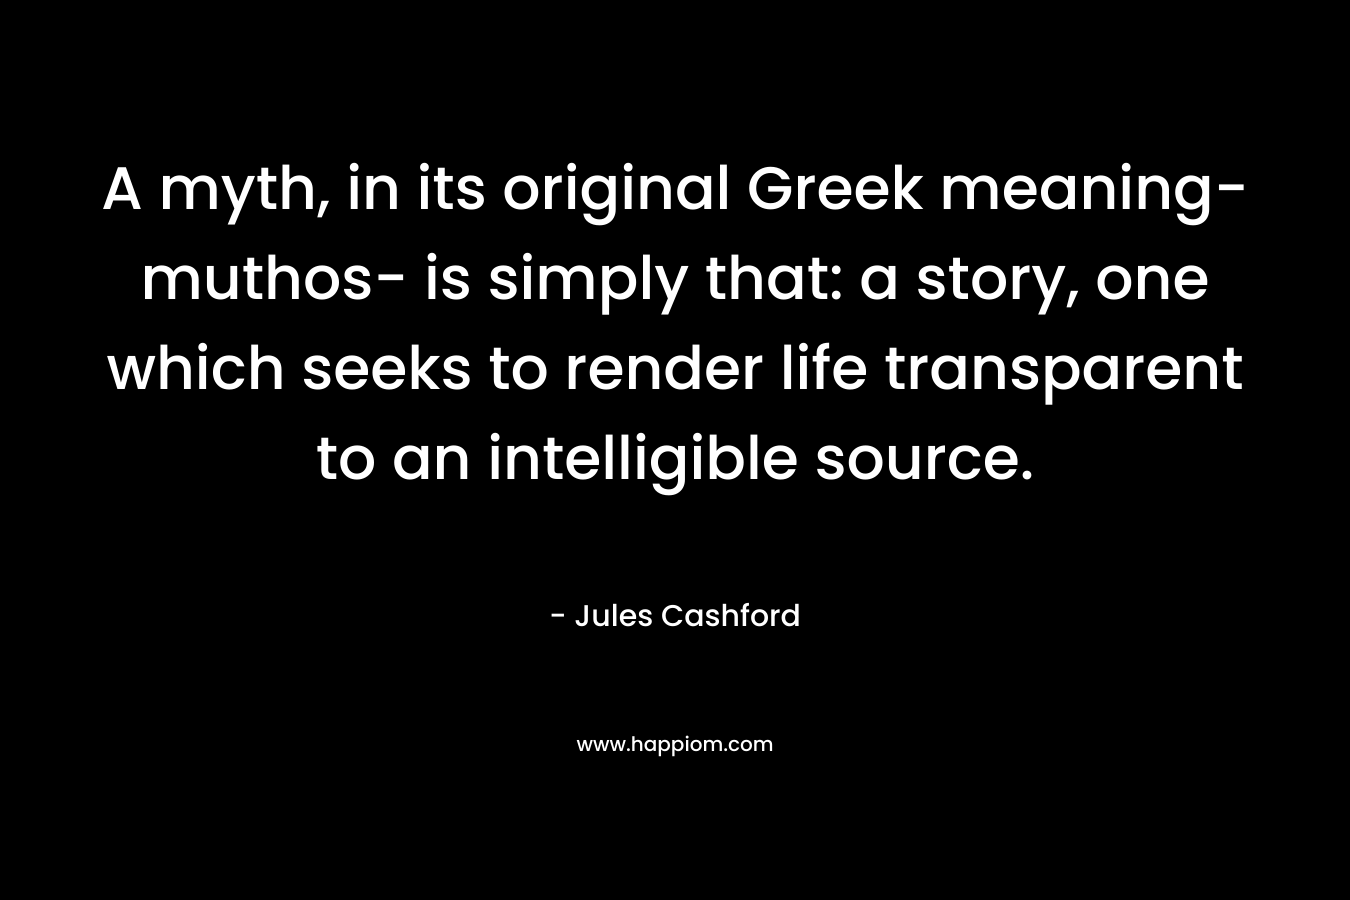 A myth, in its original Greek meaning- muthos- is simply that: a story, one which seeks to render life transparent to an intelligible source. – Jules Cashford